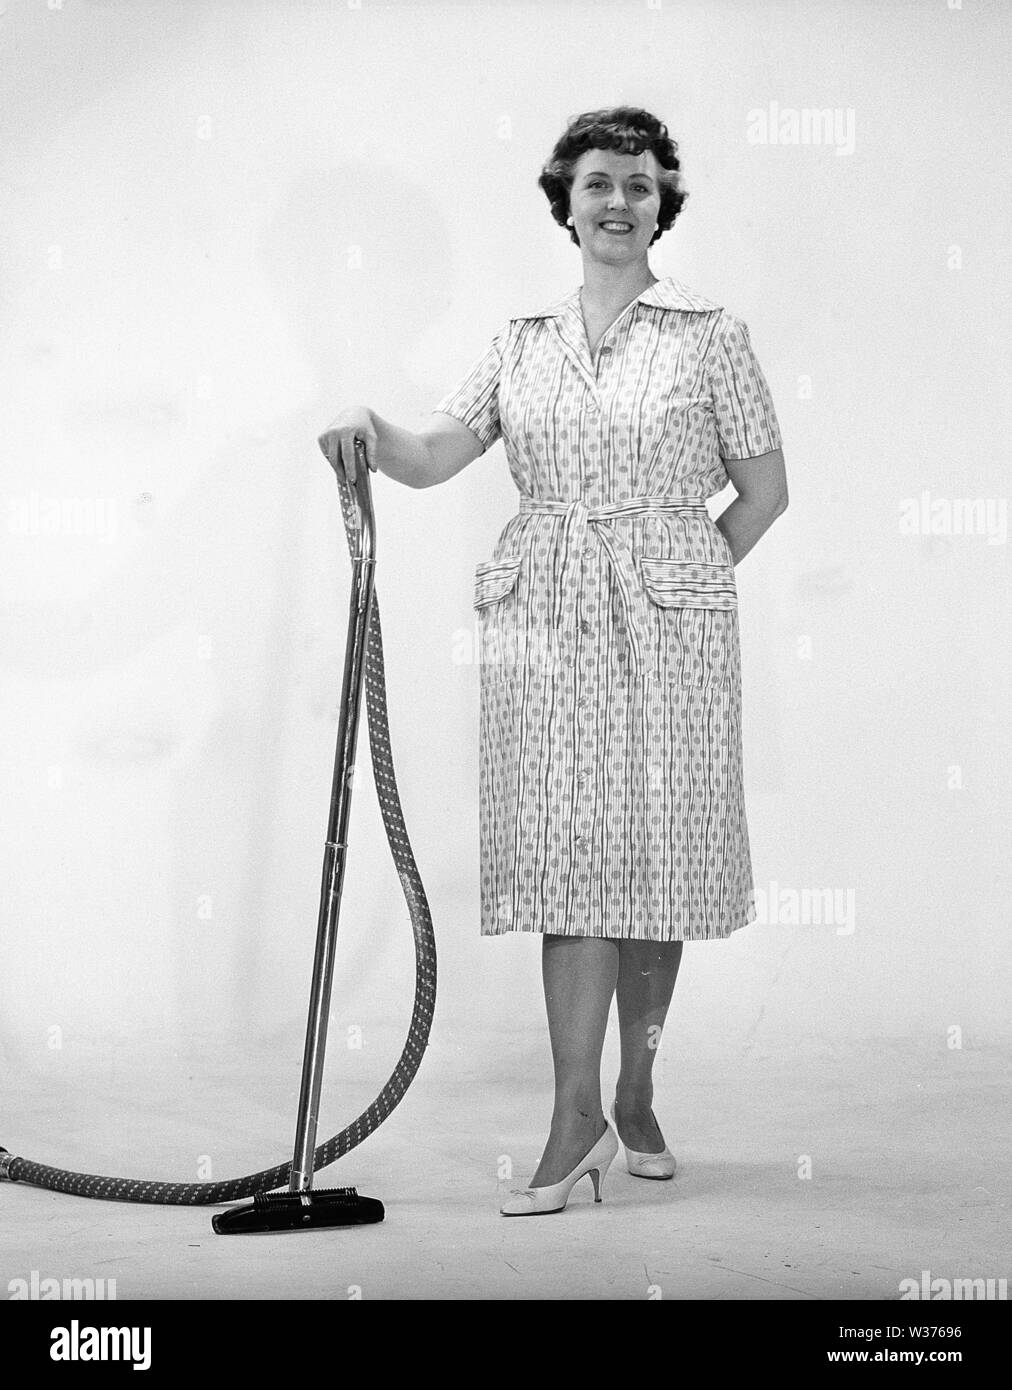 Cleaning day in the 1960s. A woman is standing holding a vacuum cleaner, looking happy. Sweden 1960s Kristoffersson ref CN109-10 Stock Photo